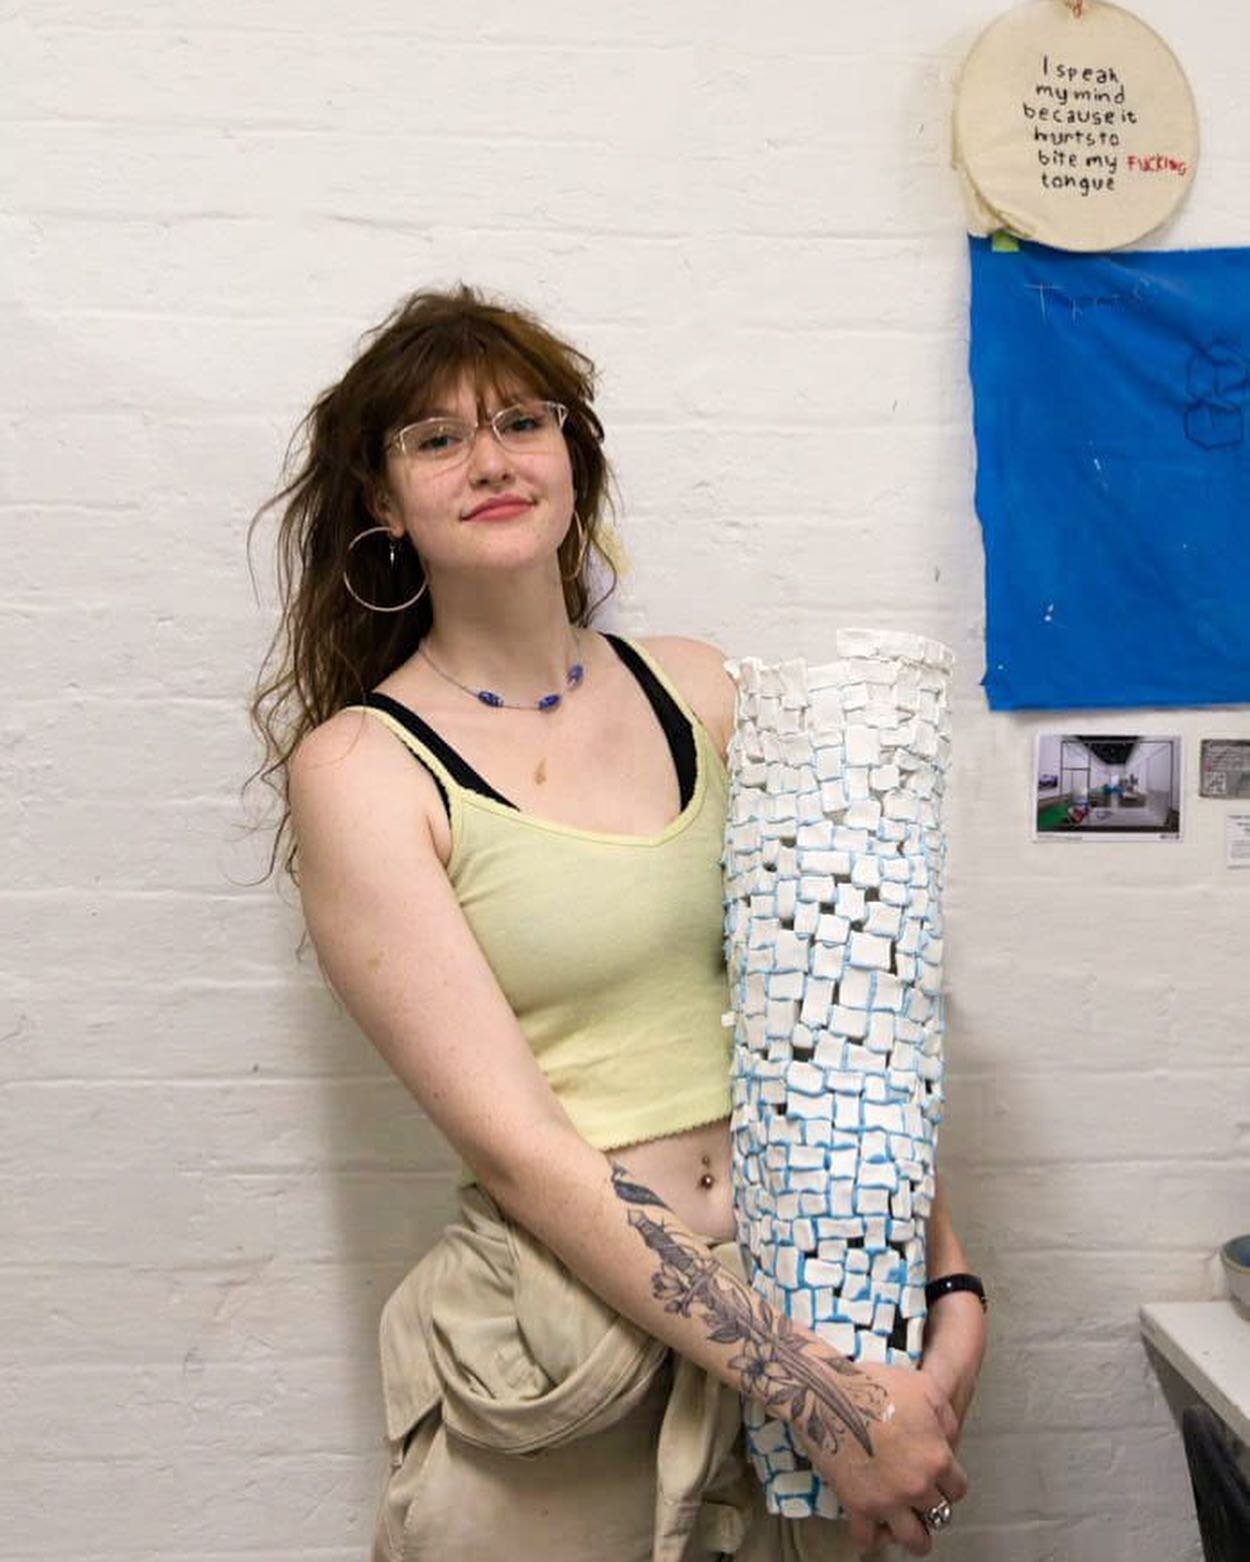 Today we are featuring Tatts, recipient of the RMIT Ceramic Student Association Award, Stockroom Ceramic Award, and R.L Foote Design Studio Award. Tatts recently completed a Bachelor of Fine Art (Ceramics) in 2023, where she was the Ceramic Associati